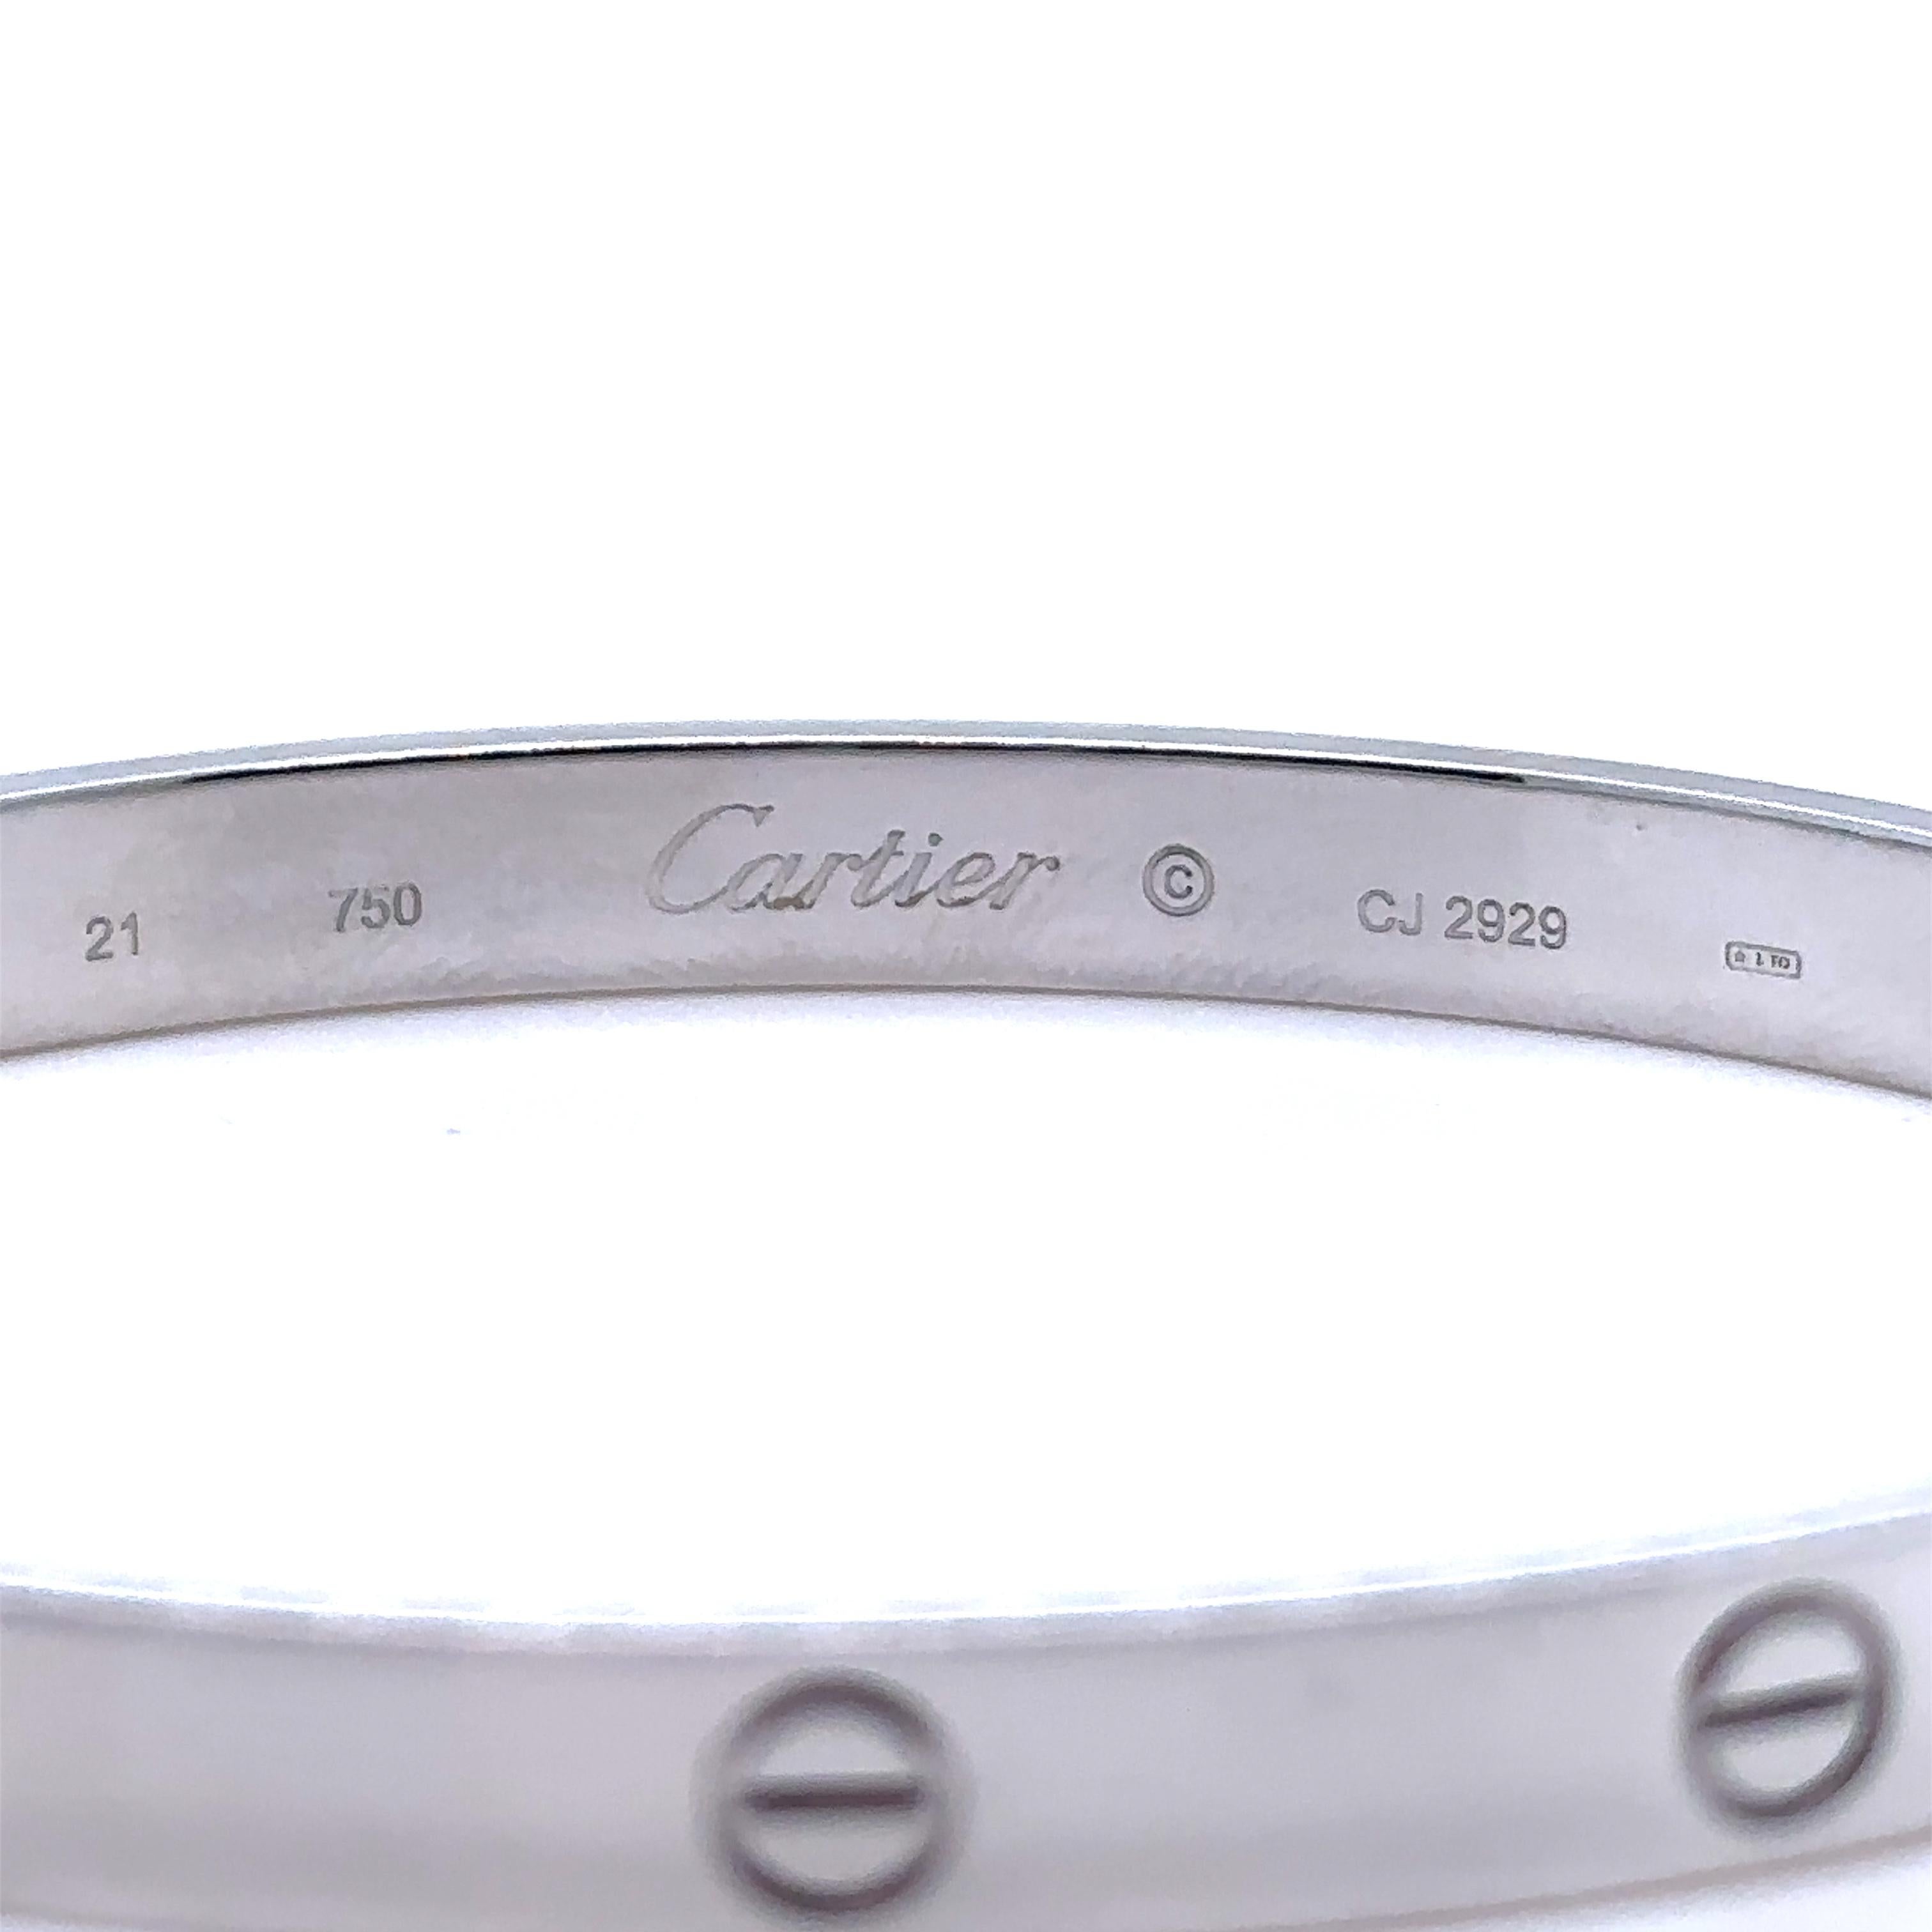 Unique features: 

A Cartier love bracelet. Made of 18 ct White Gold.

Metal: 18ct White Gold
Carat: N/A
Colour: N/A
Clarity:  N/A
Cut: N/A
Weight: 41.1 grams
Engravings/Markings: Signed 21 750 Cartier CJ2929

Size/Measurement: Size 21

Current